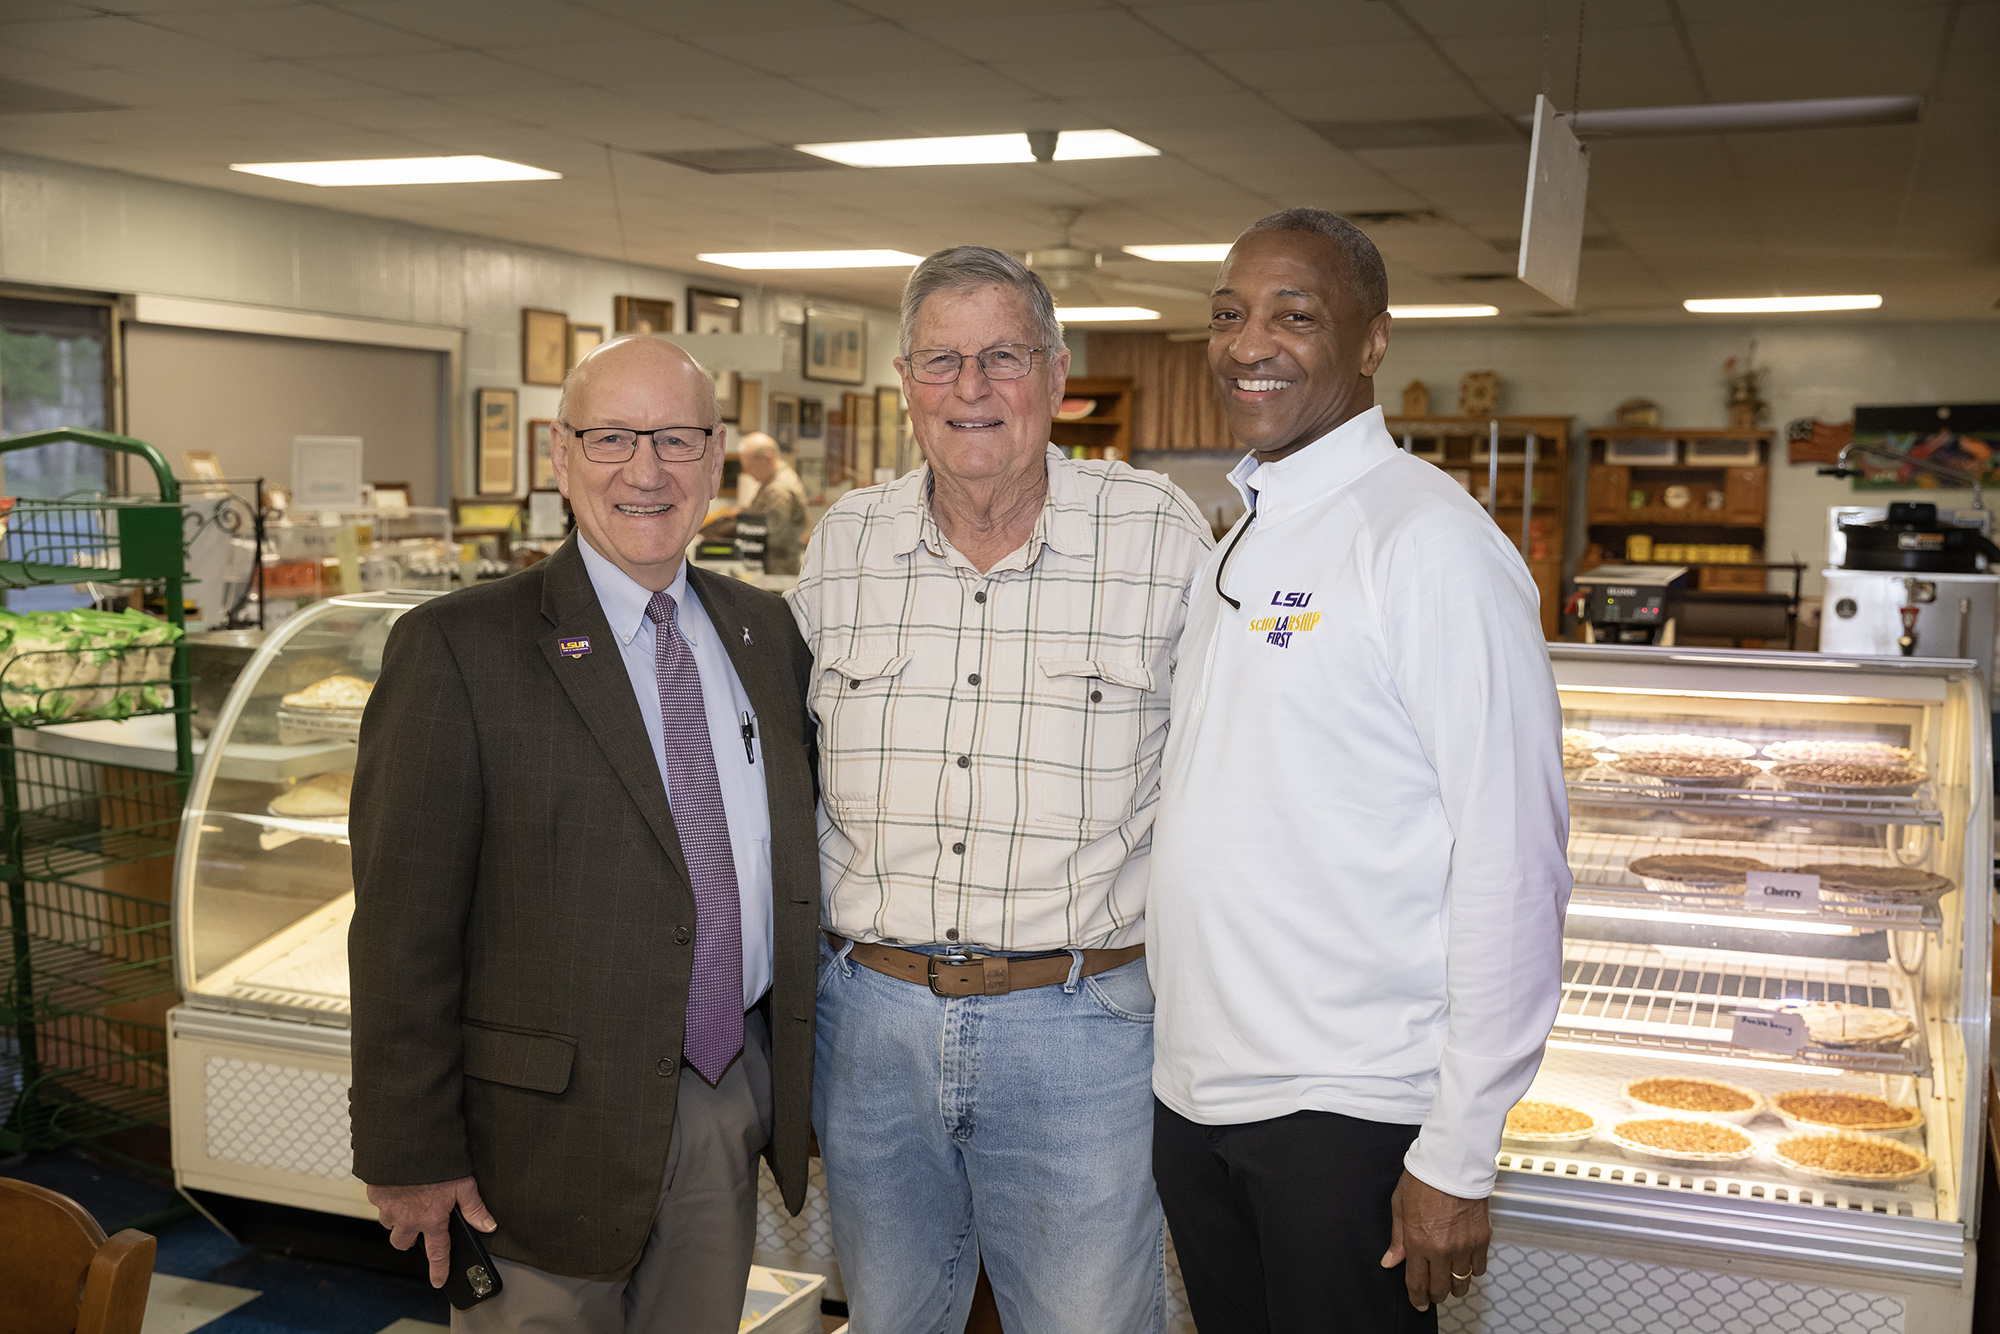 President Tate posing with others at Lea's Lunchroom